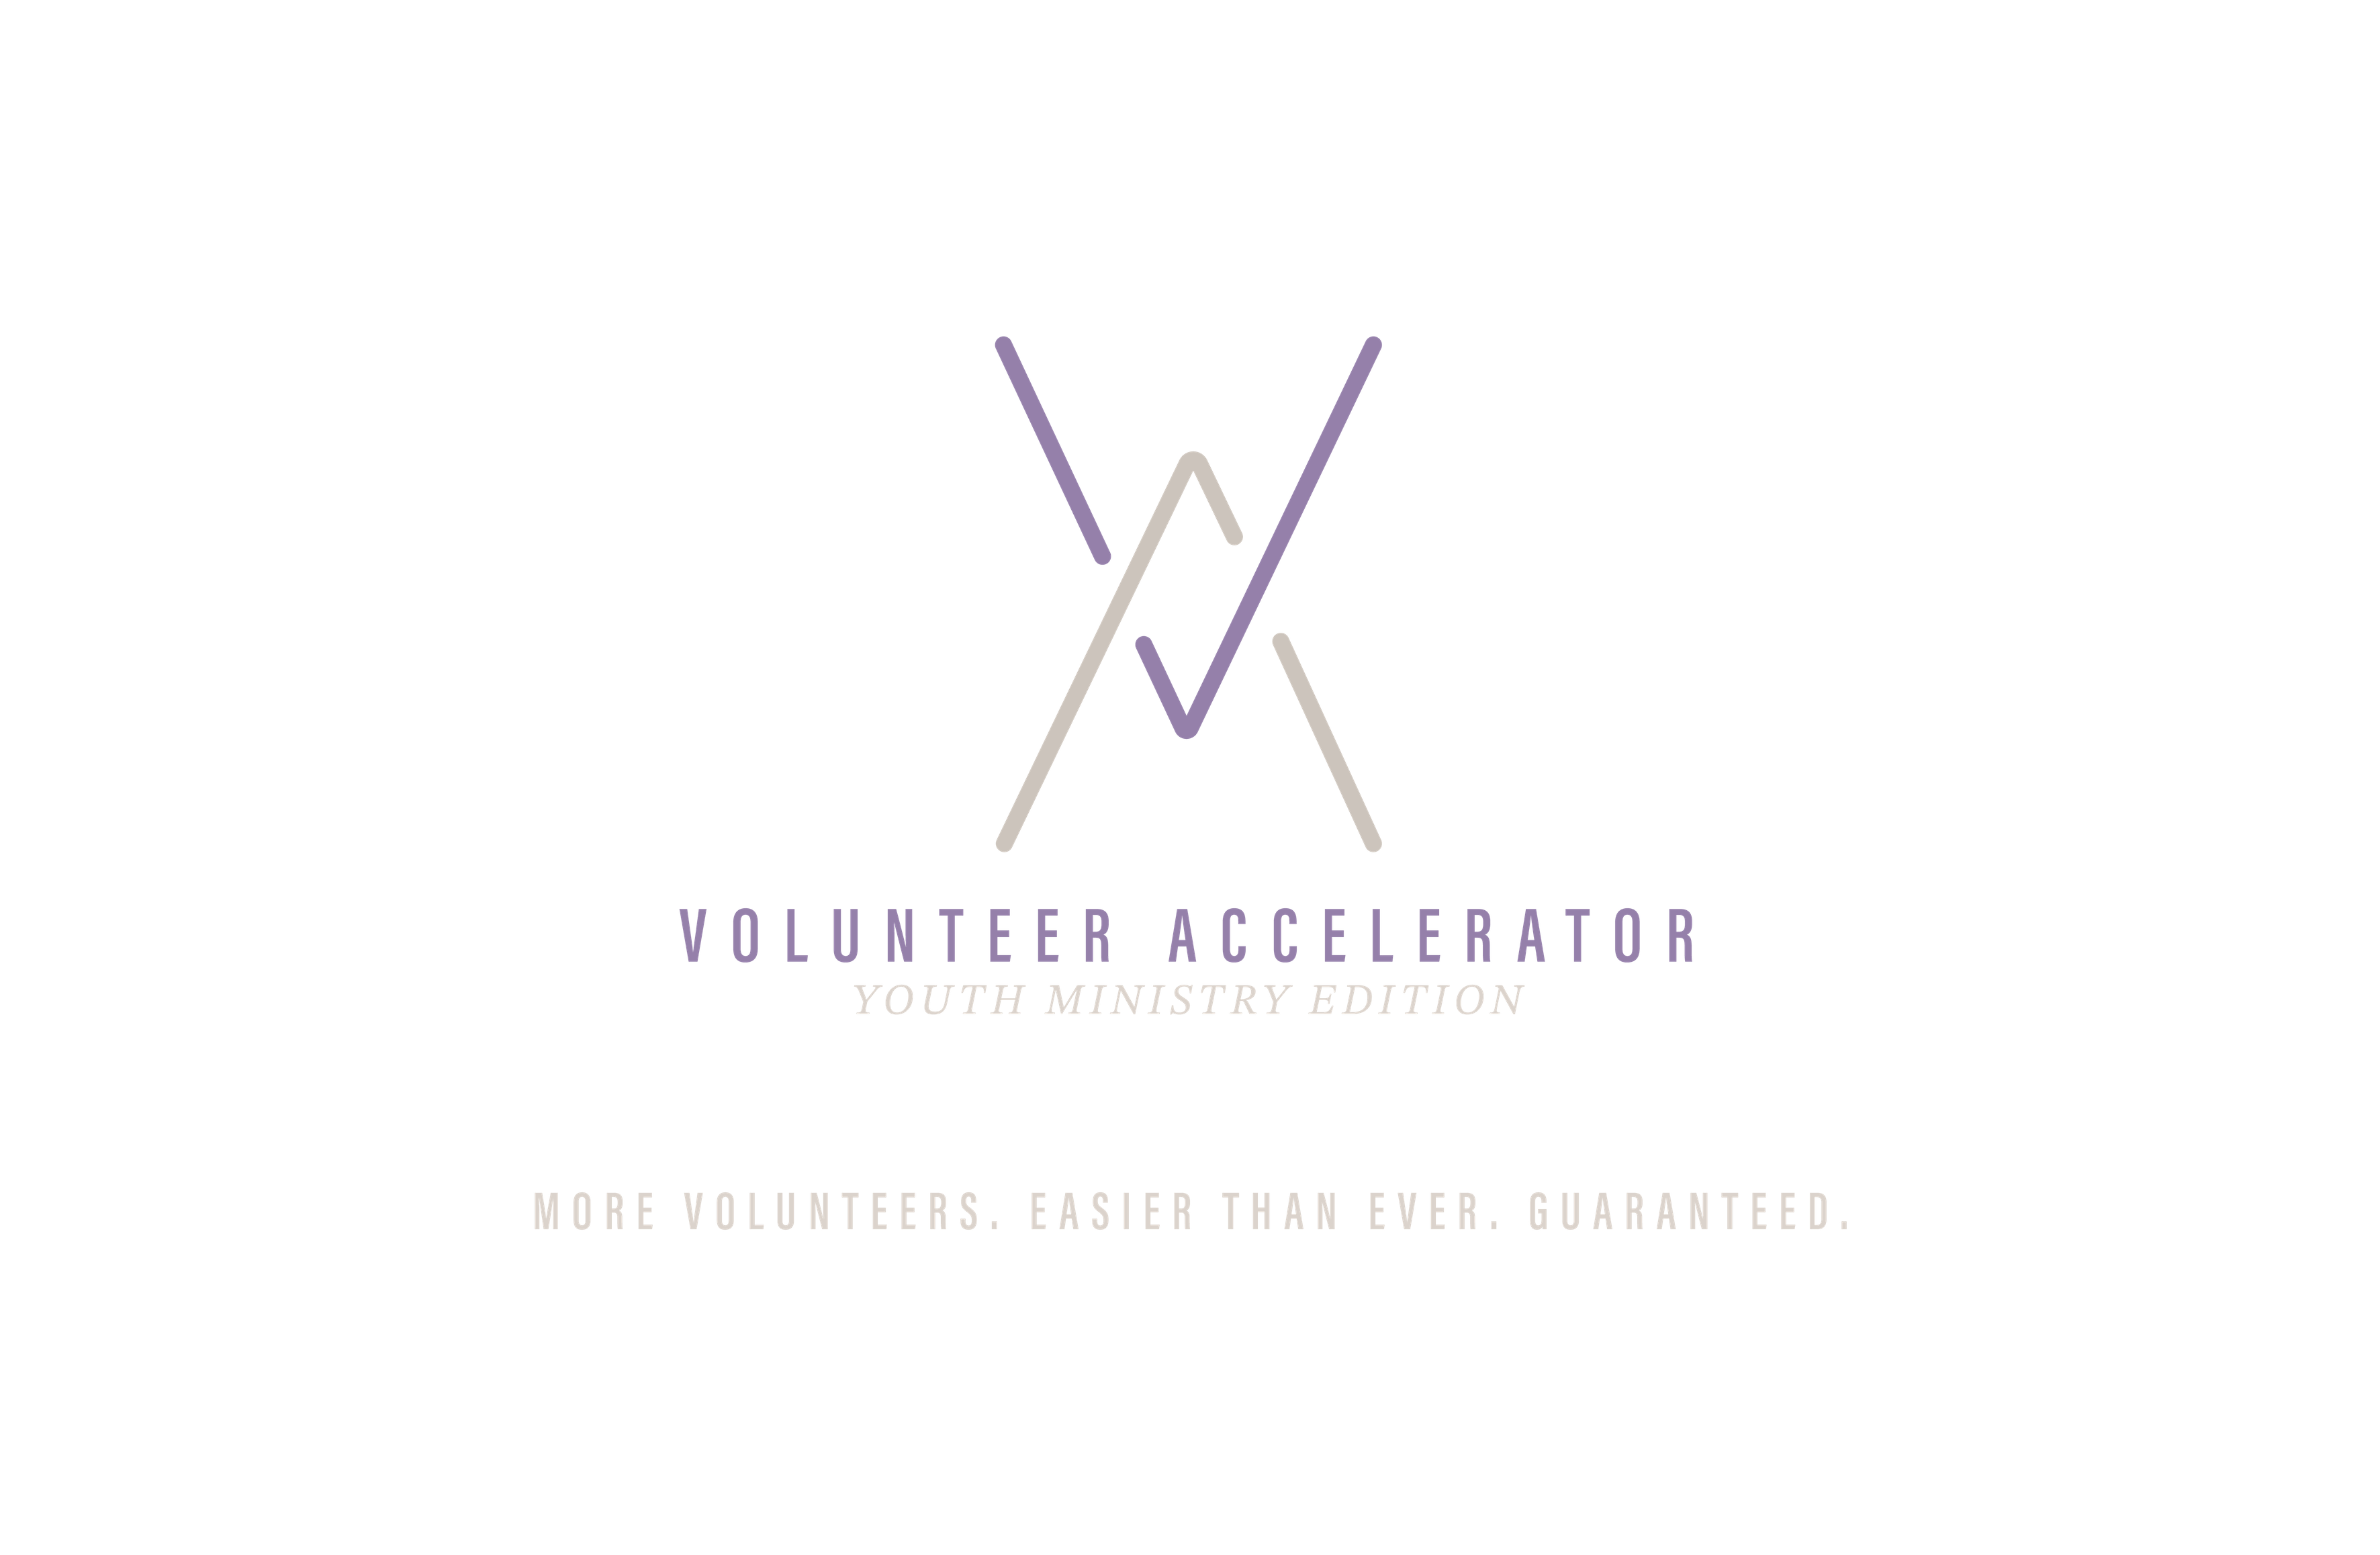 Volunteer Accelerator: Youth Ministry Edition